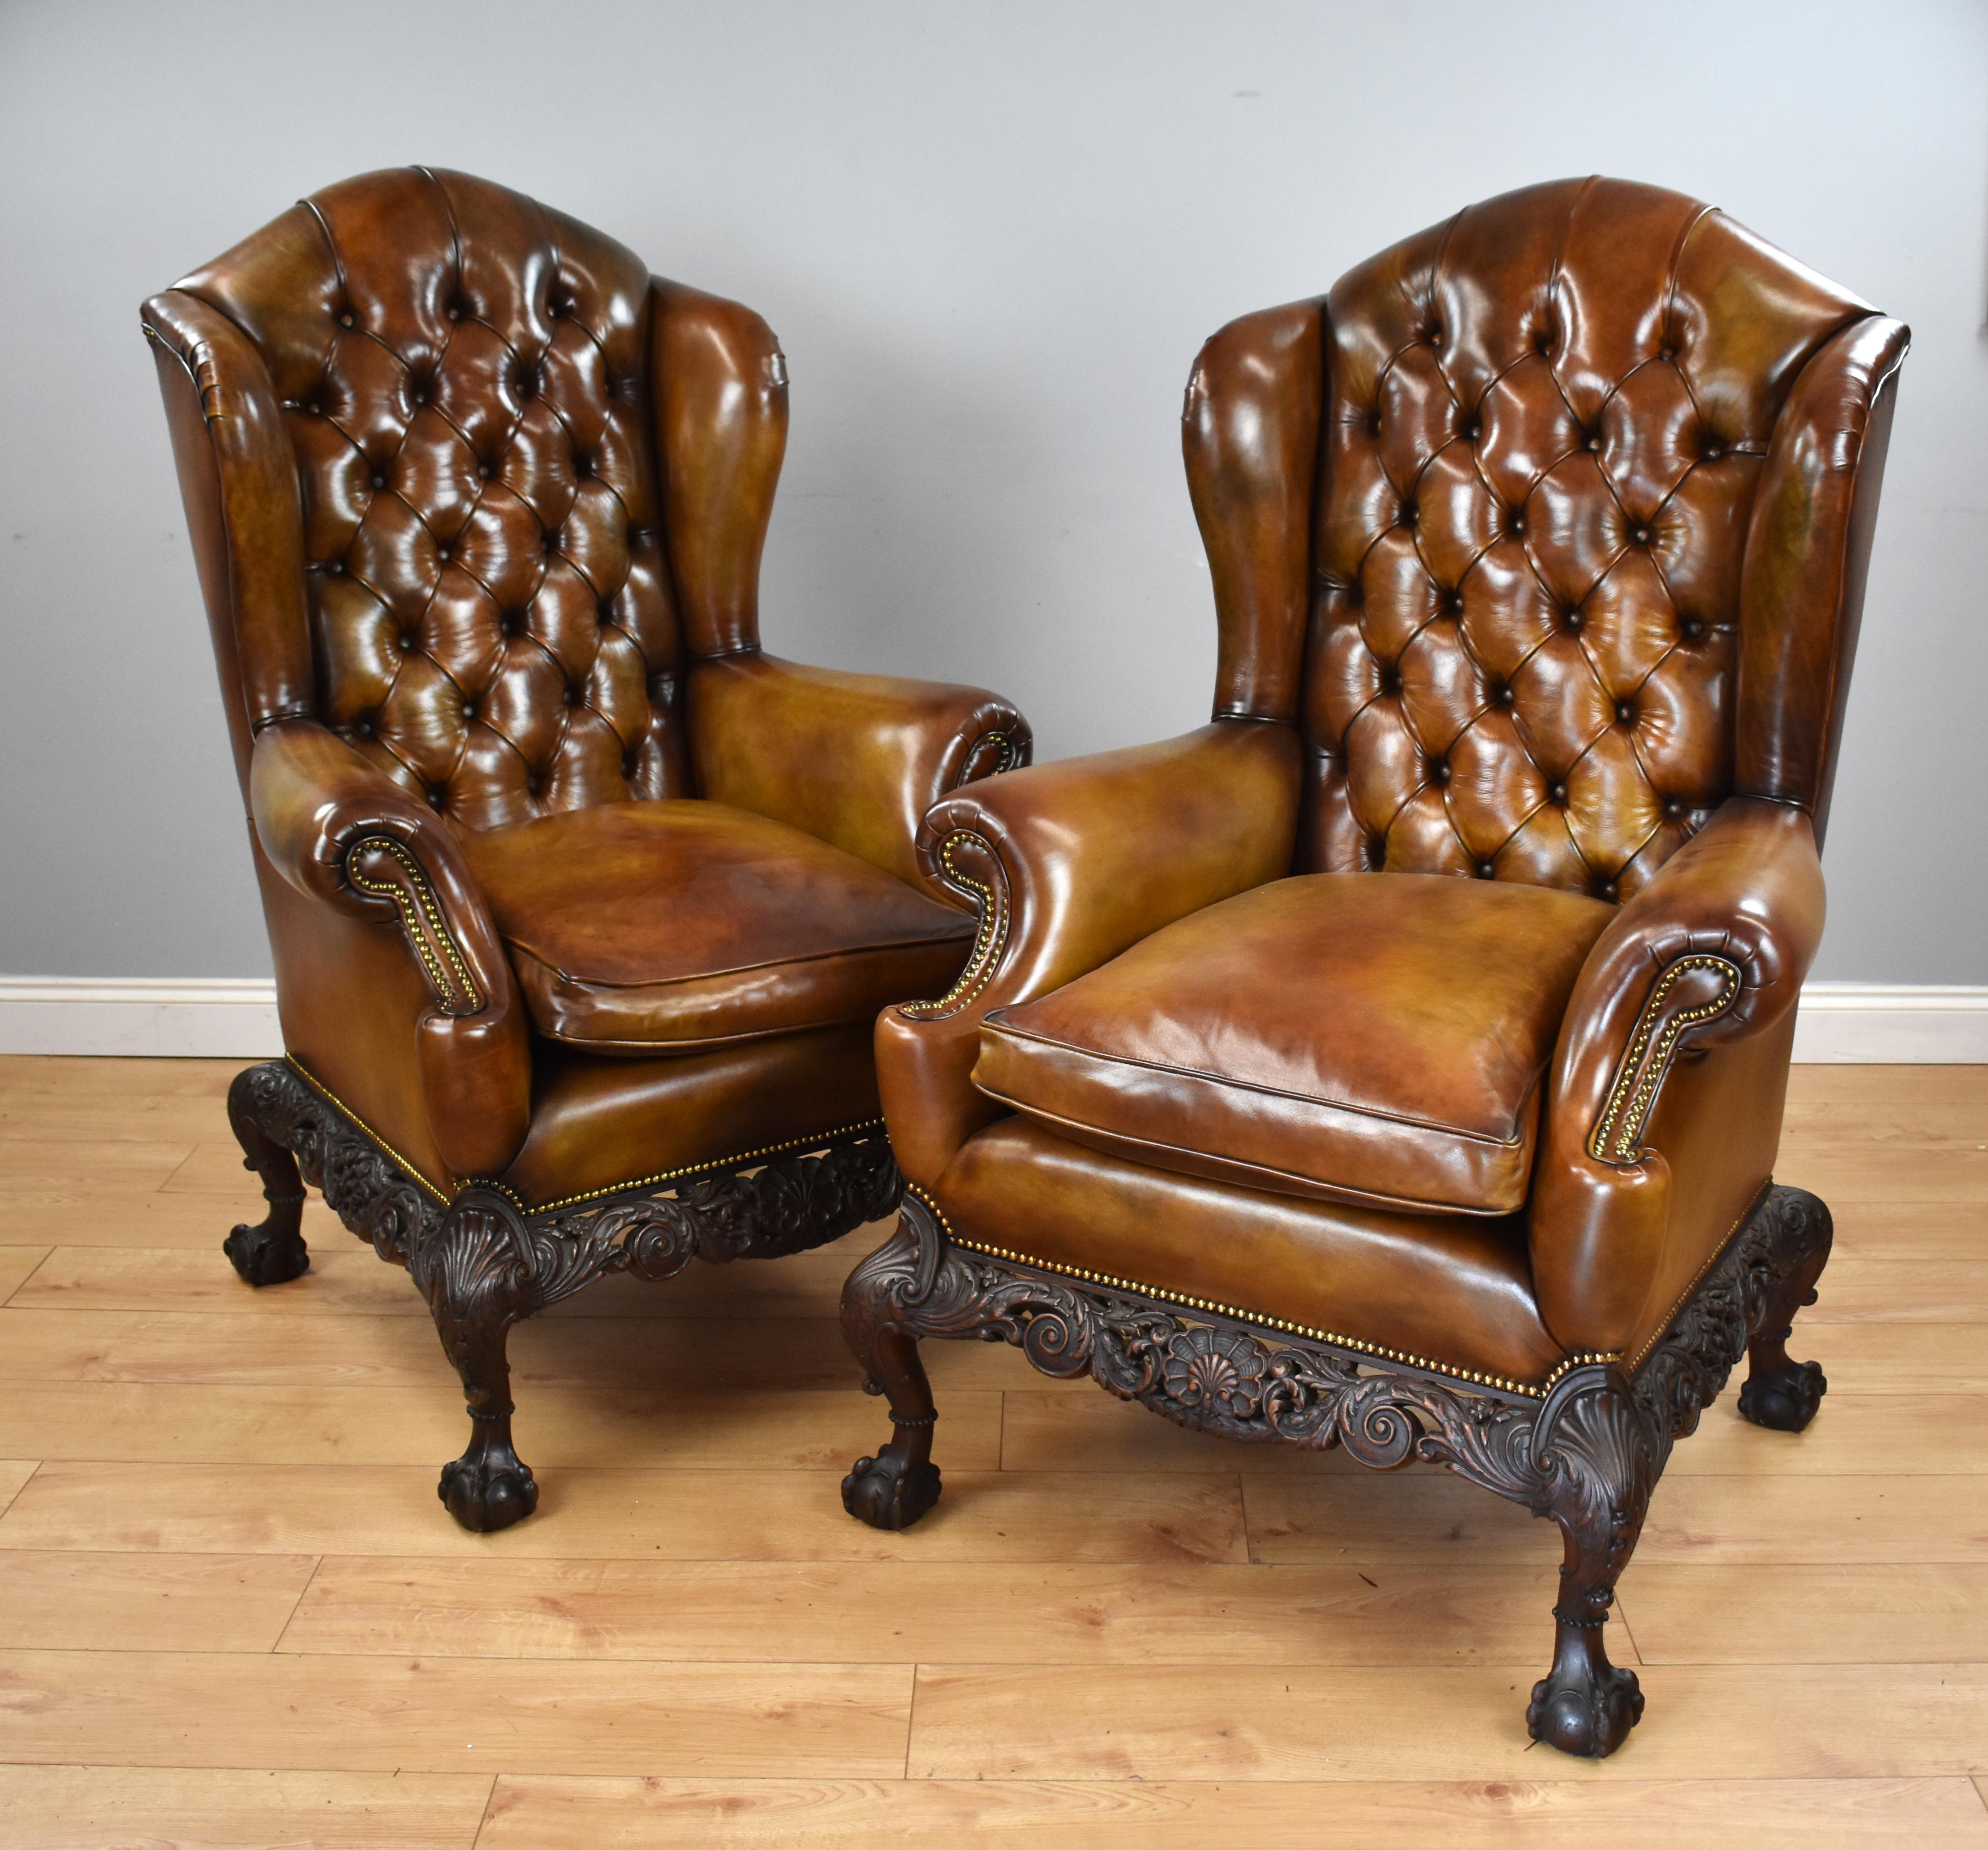 For sale is a top quality pair of Victorian hand dyed leather wing back armchairs, each having arched tops above deep buttoned backs, flanked by wings, with a cushion below, with a scroll arm on either side, each with brass studding. Both chairs